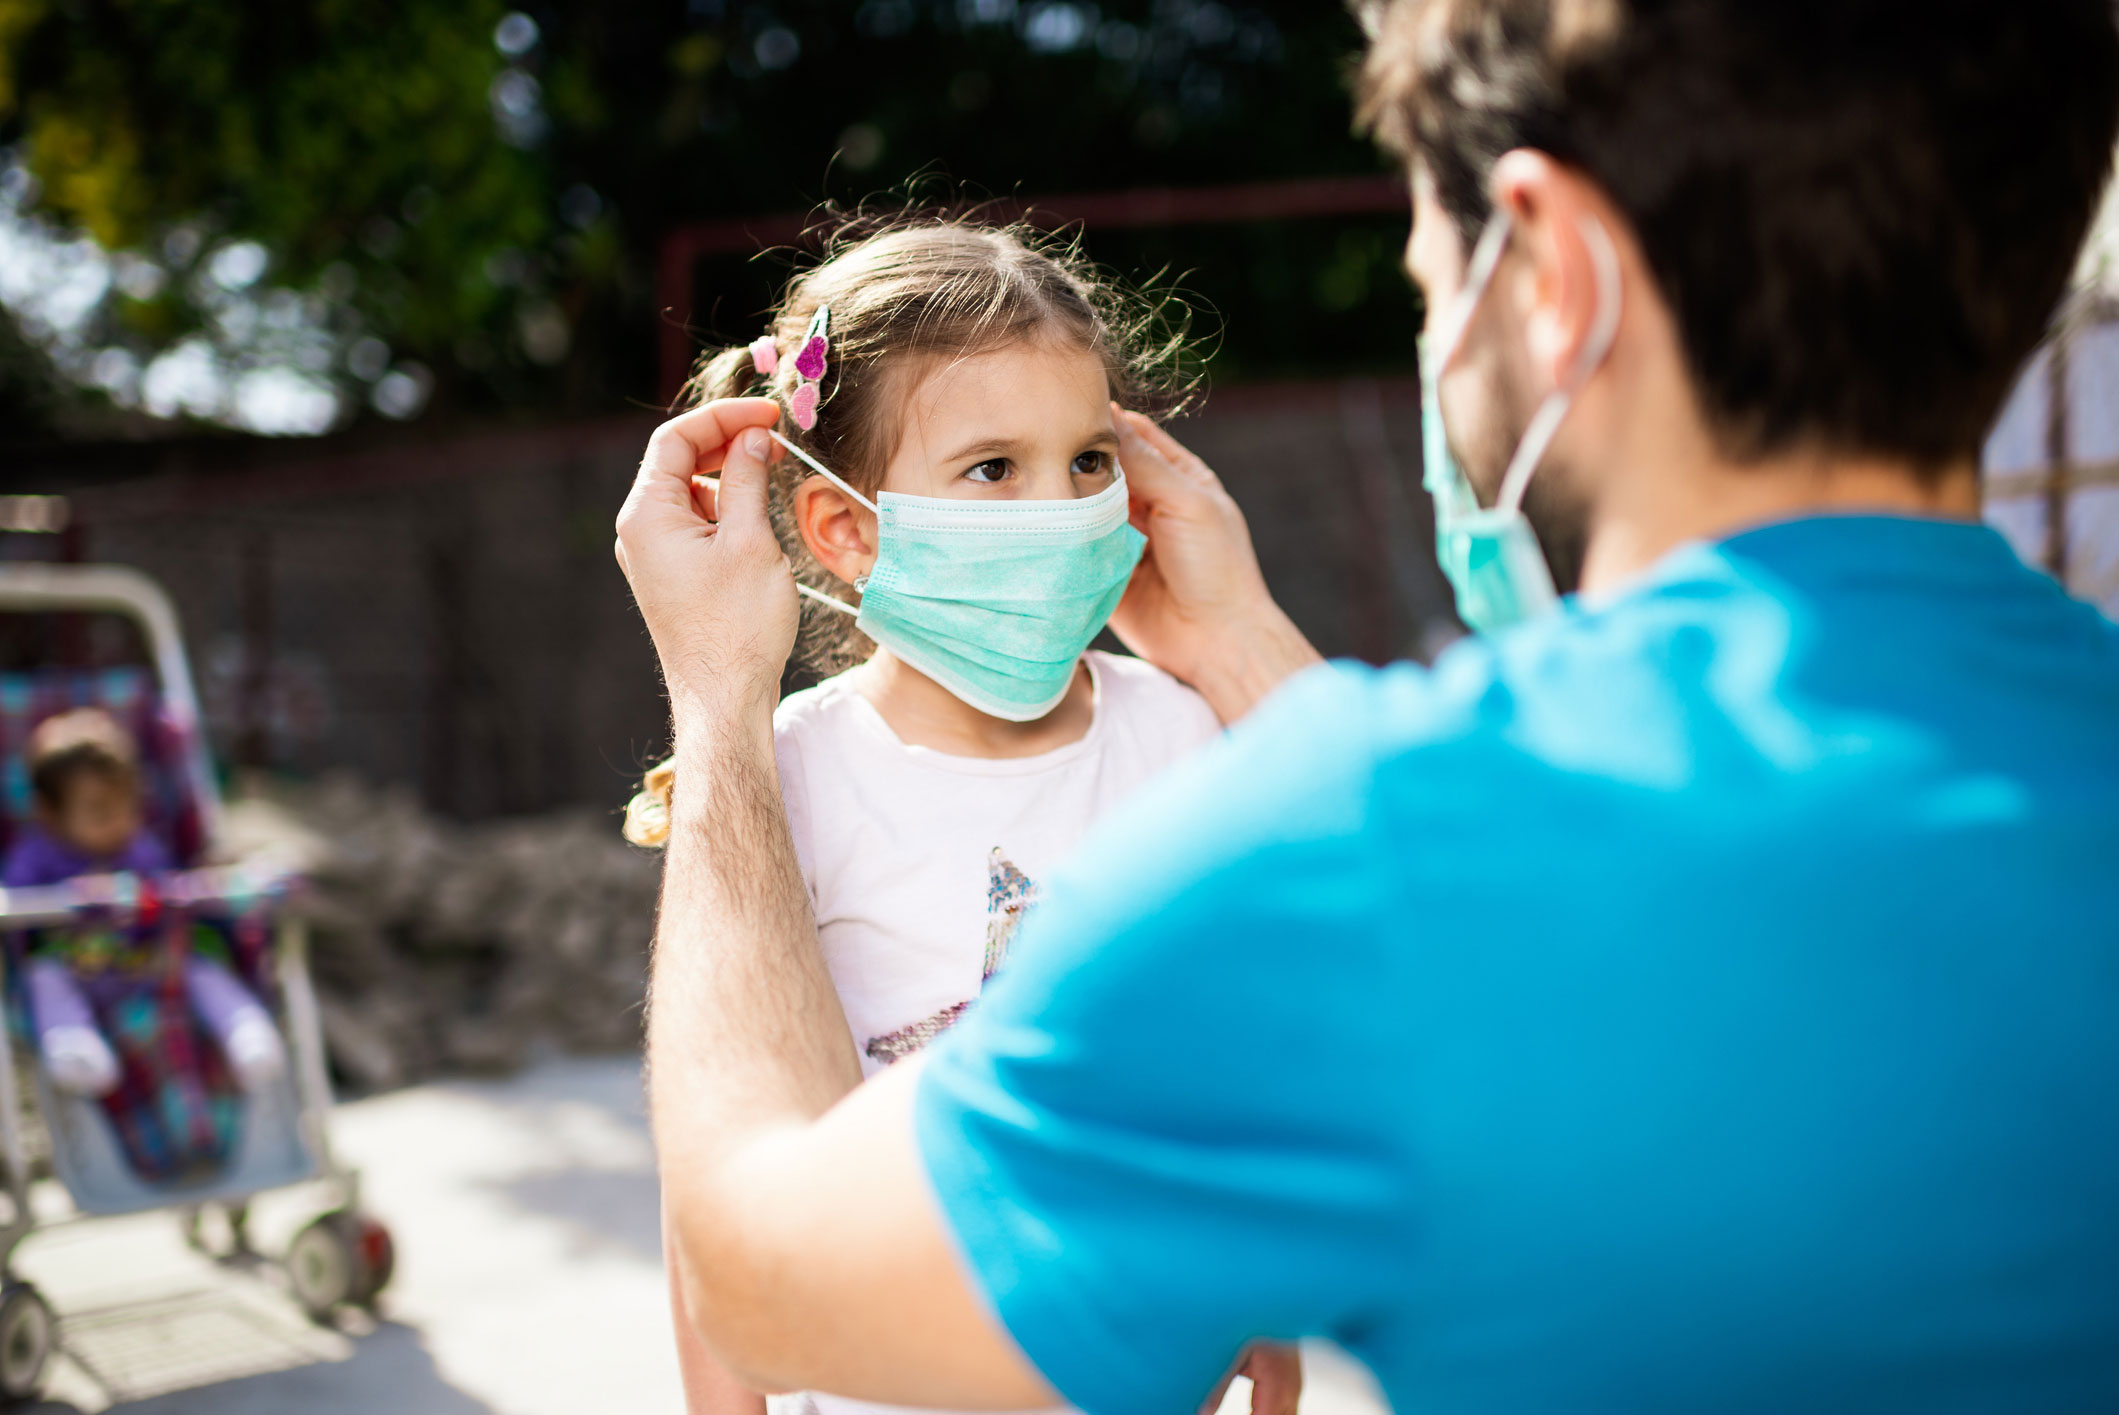 Dad putting a protective mask on his daughter